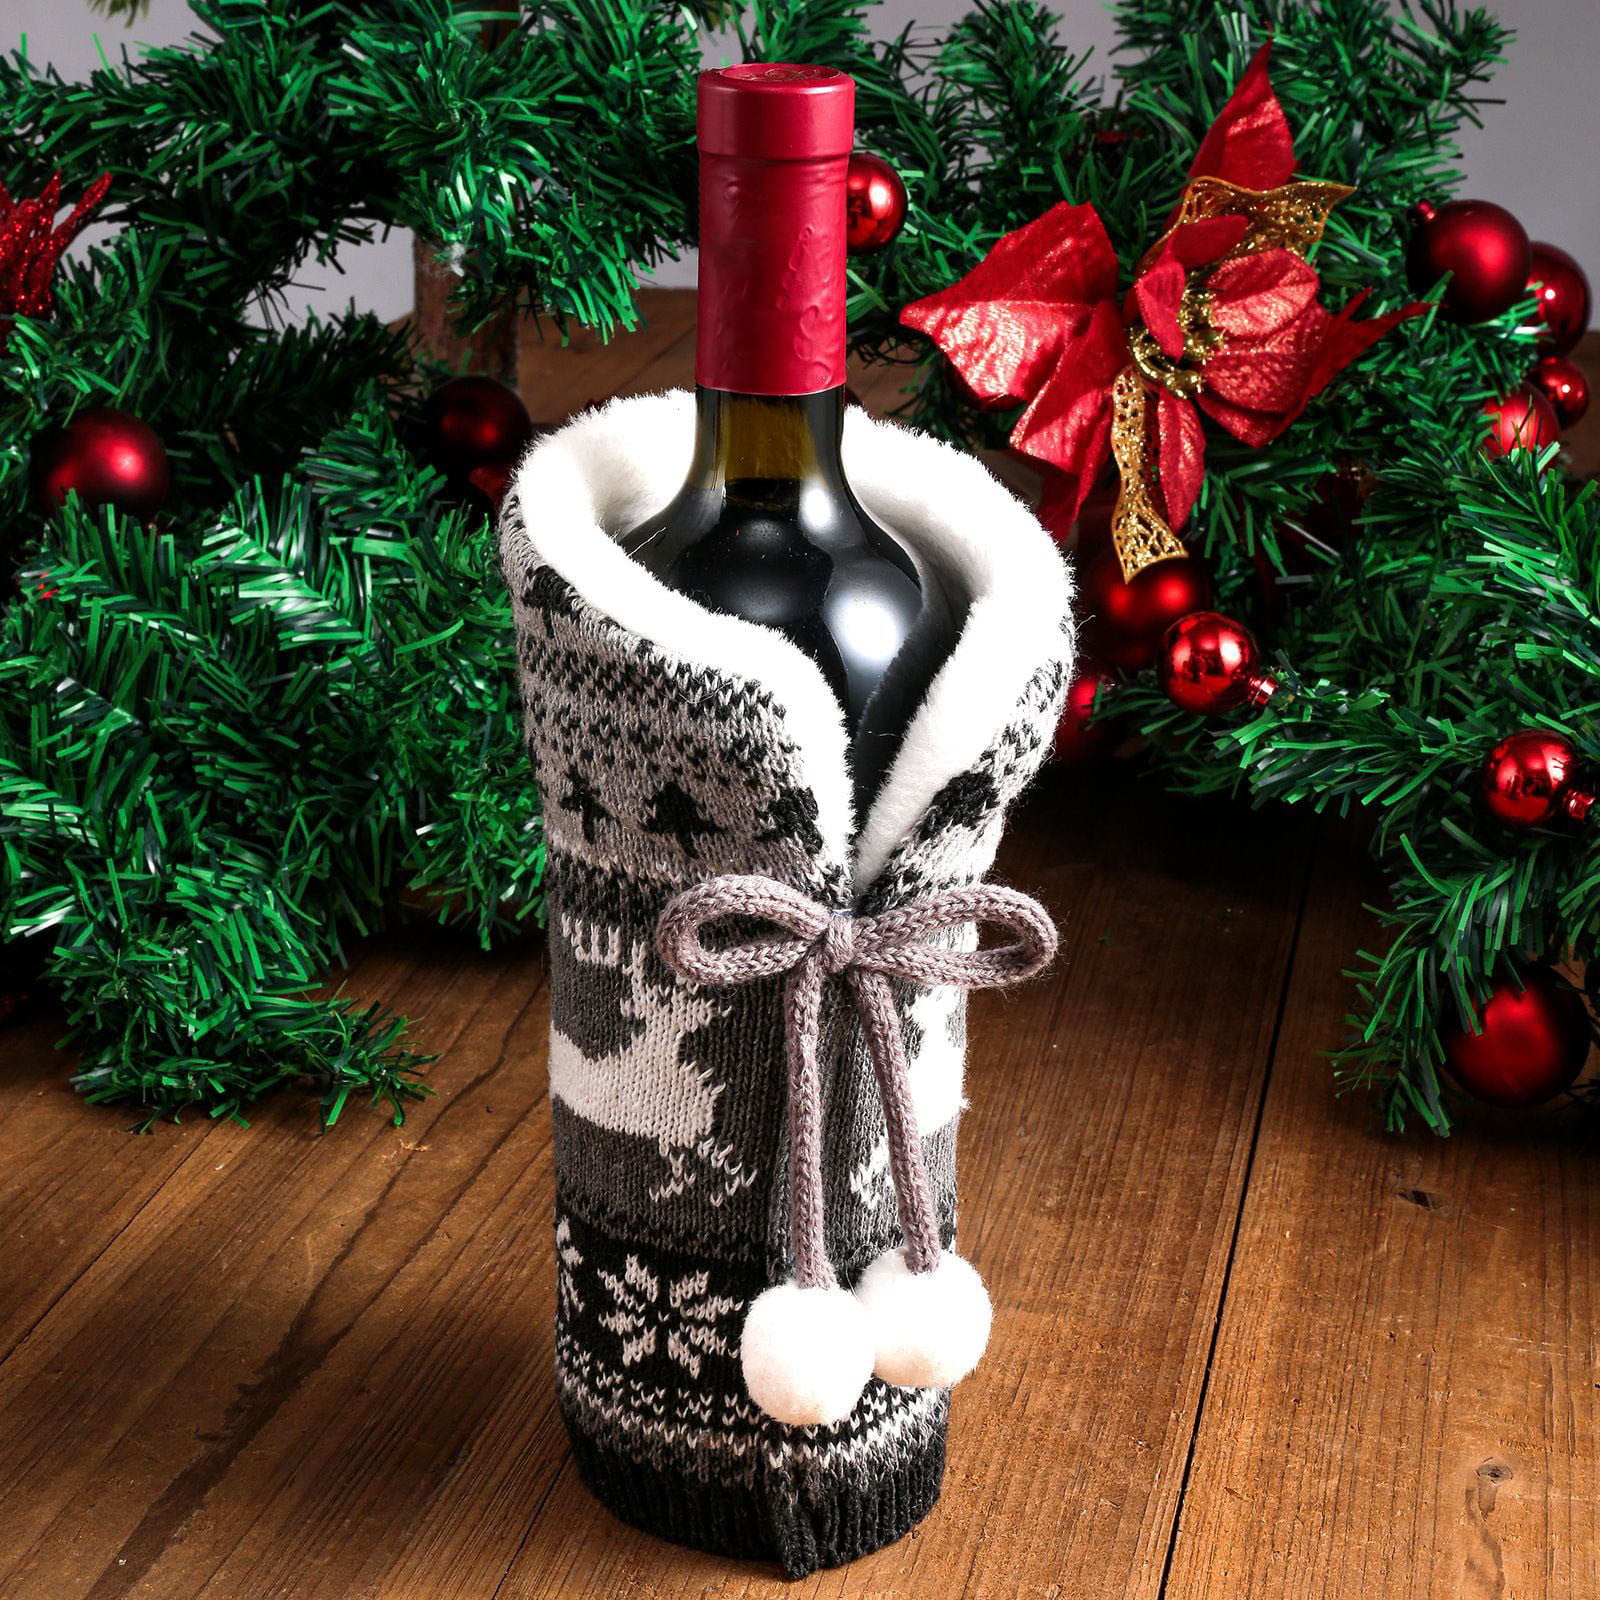 Red Wine Bottle Cover Bags Snowman Santa Claus Christmas Decoration Table Xmas 